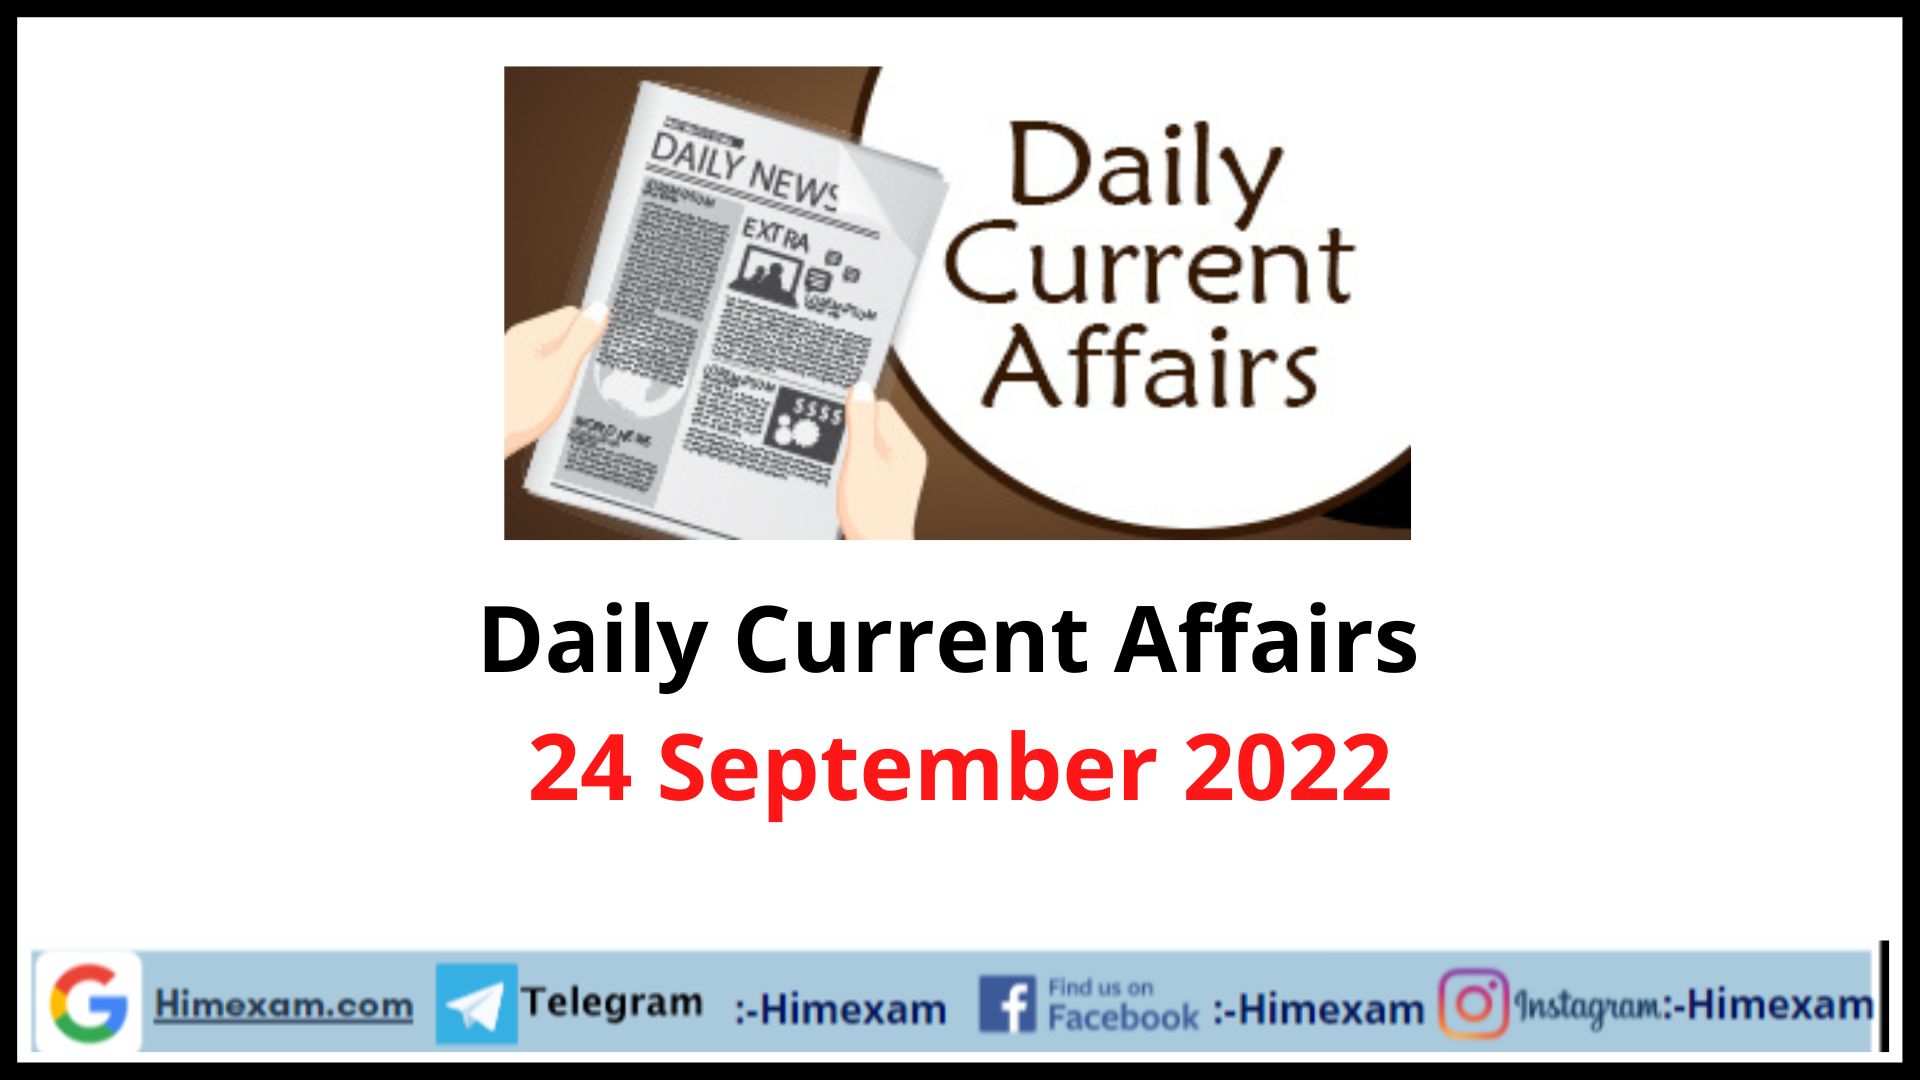 Daily Current Affairs 24 September 2022